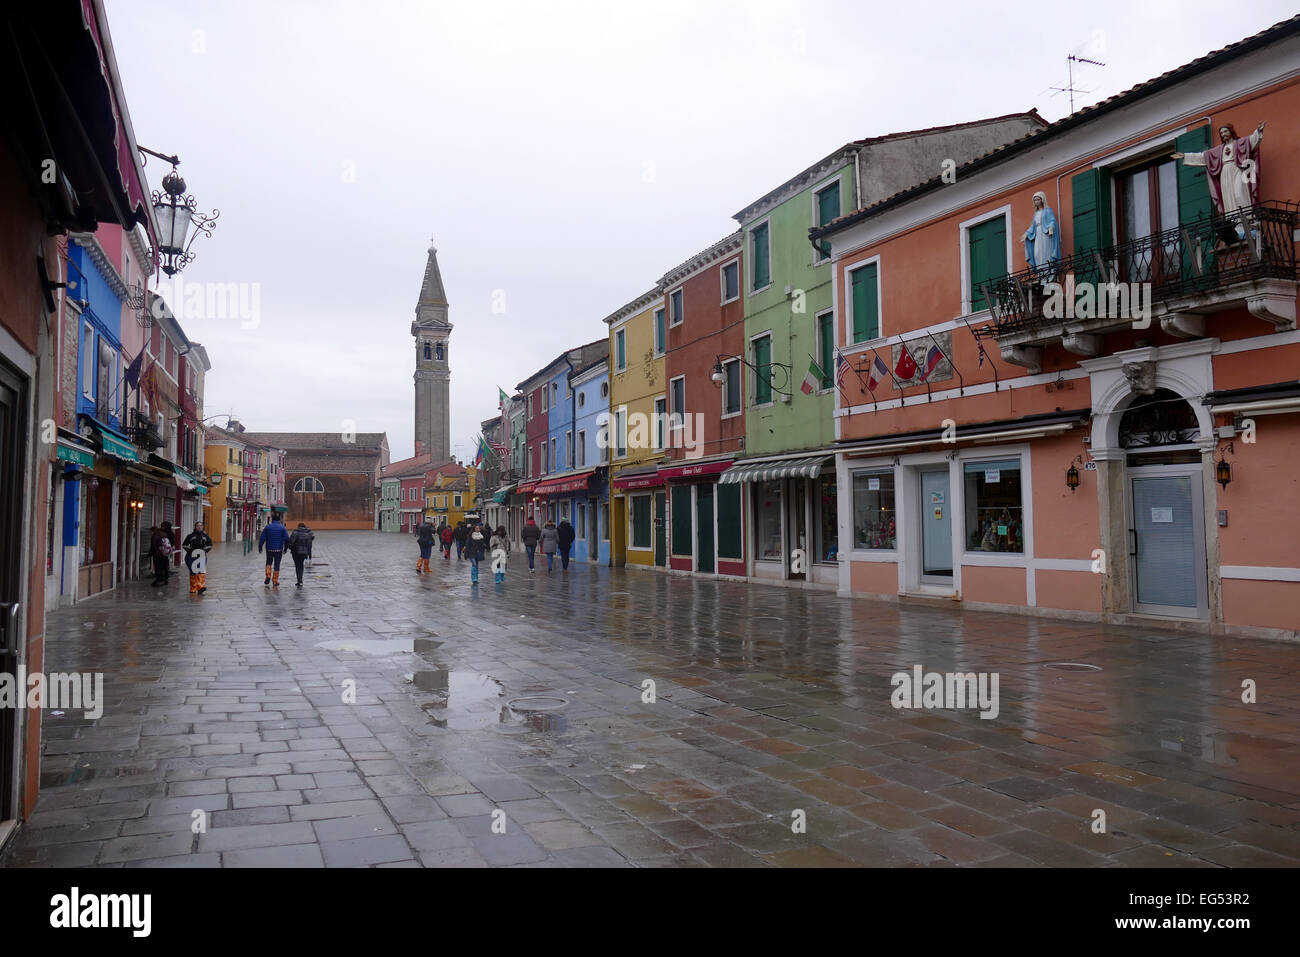 Burano - colorful island archipelago of four separate islands connected by bridges. Burano island called color of the laces. The Stock Photo